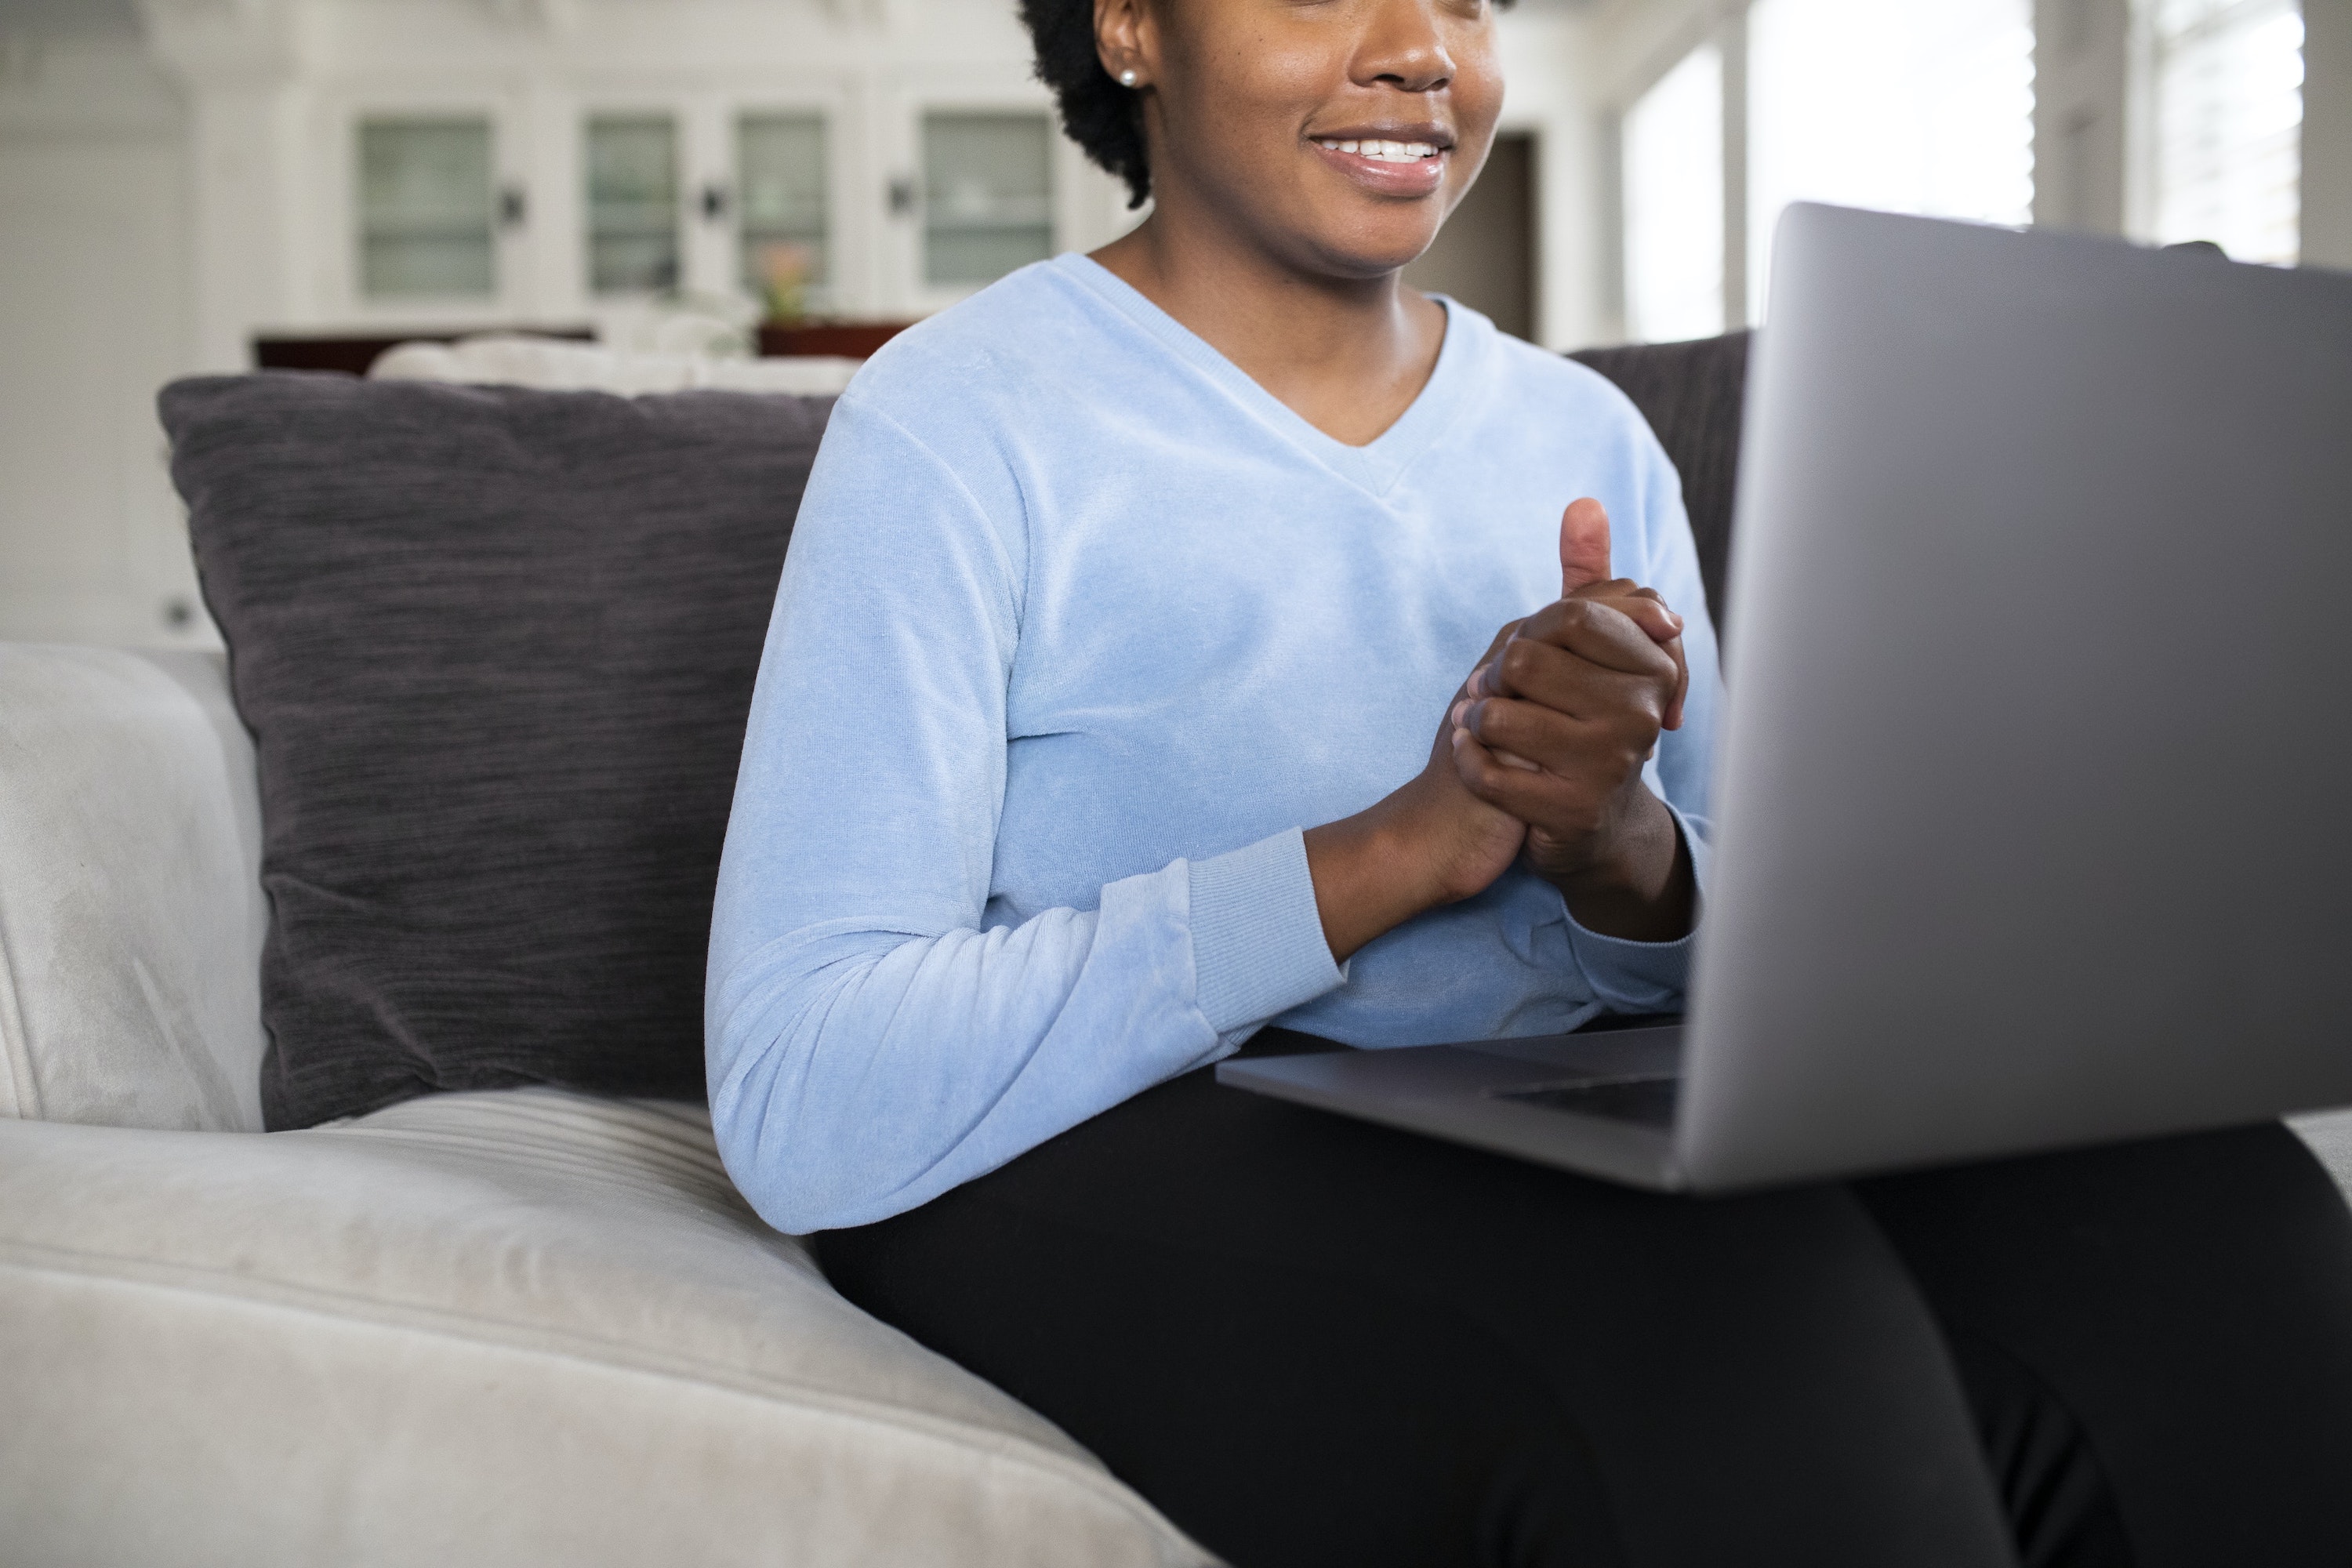 women clasping hands together and smiling while looking at computer screen in her living room